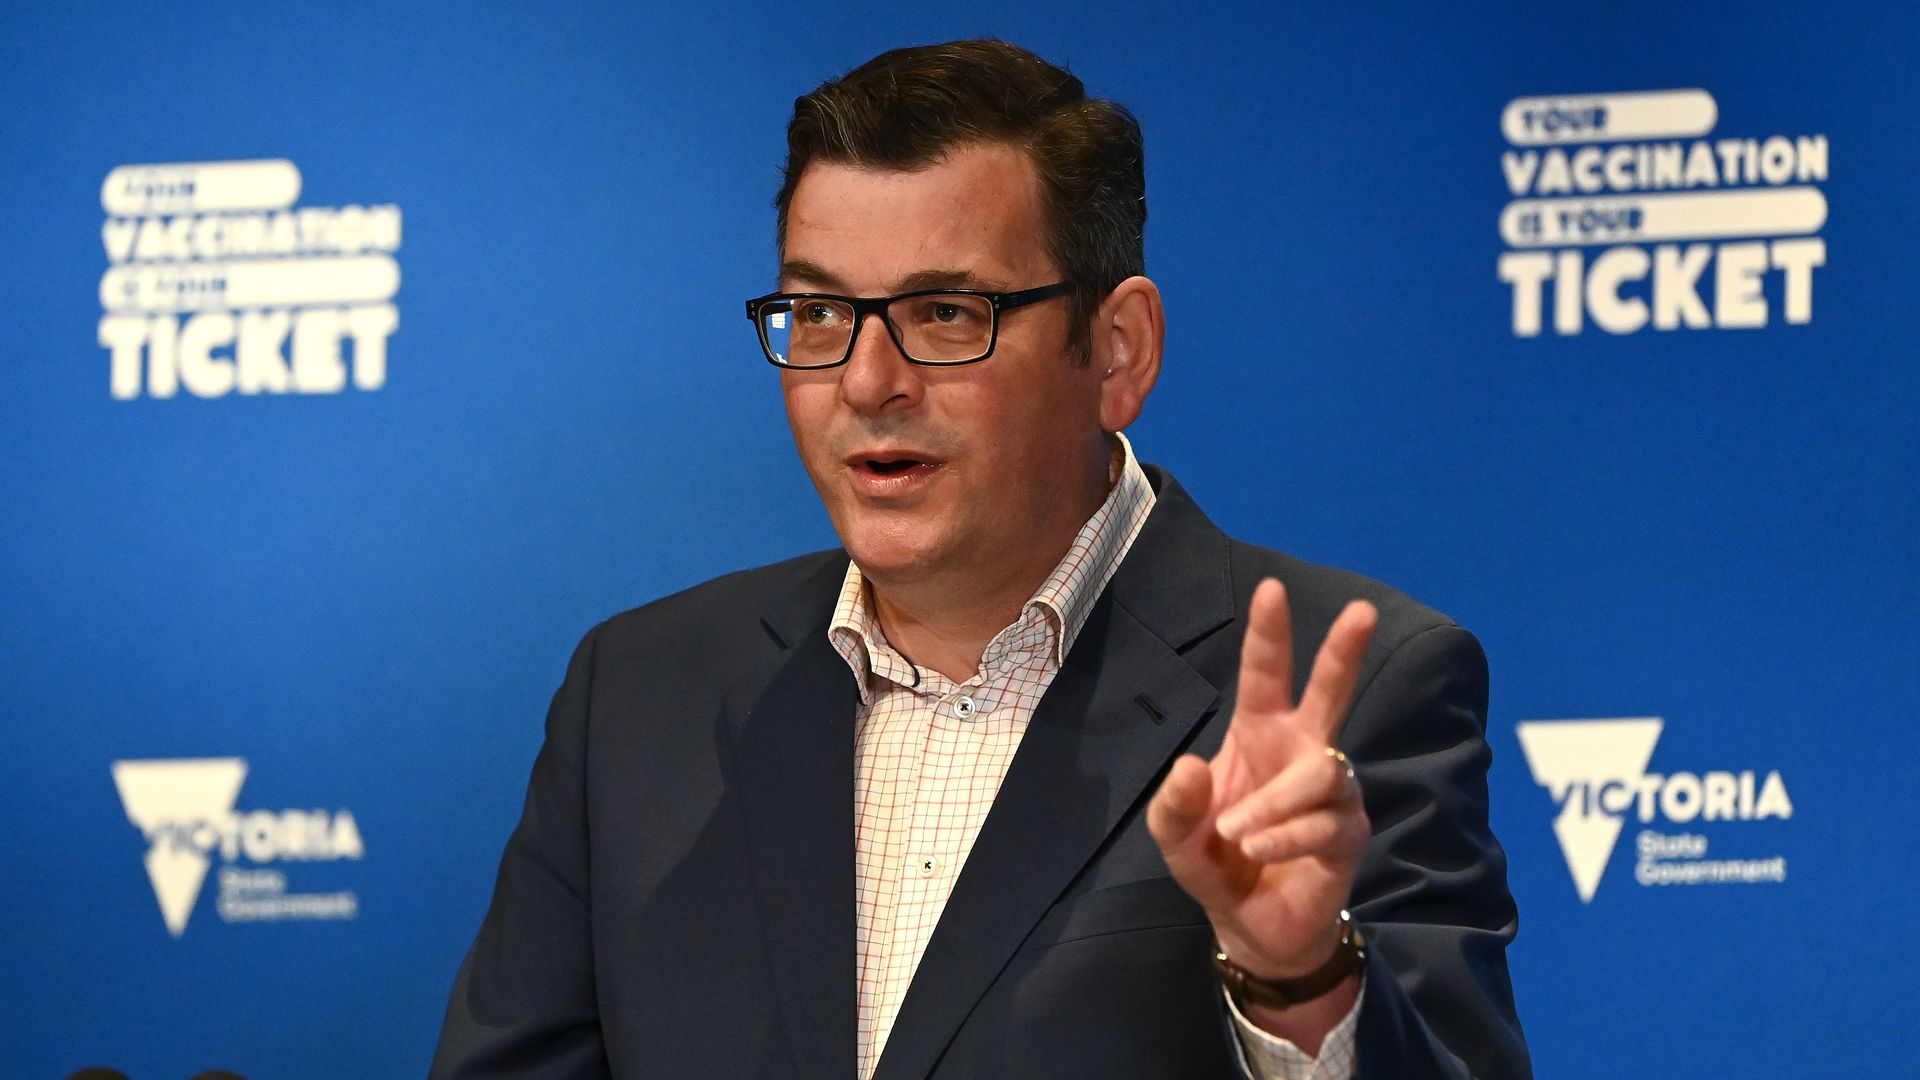   Victorian Premier Daniel Andrews during a news conference in Melbourne, Australia, on Sunday. 